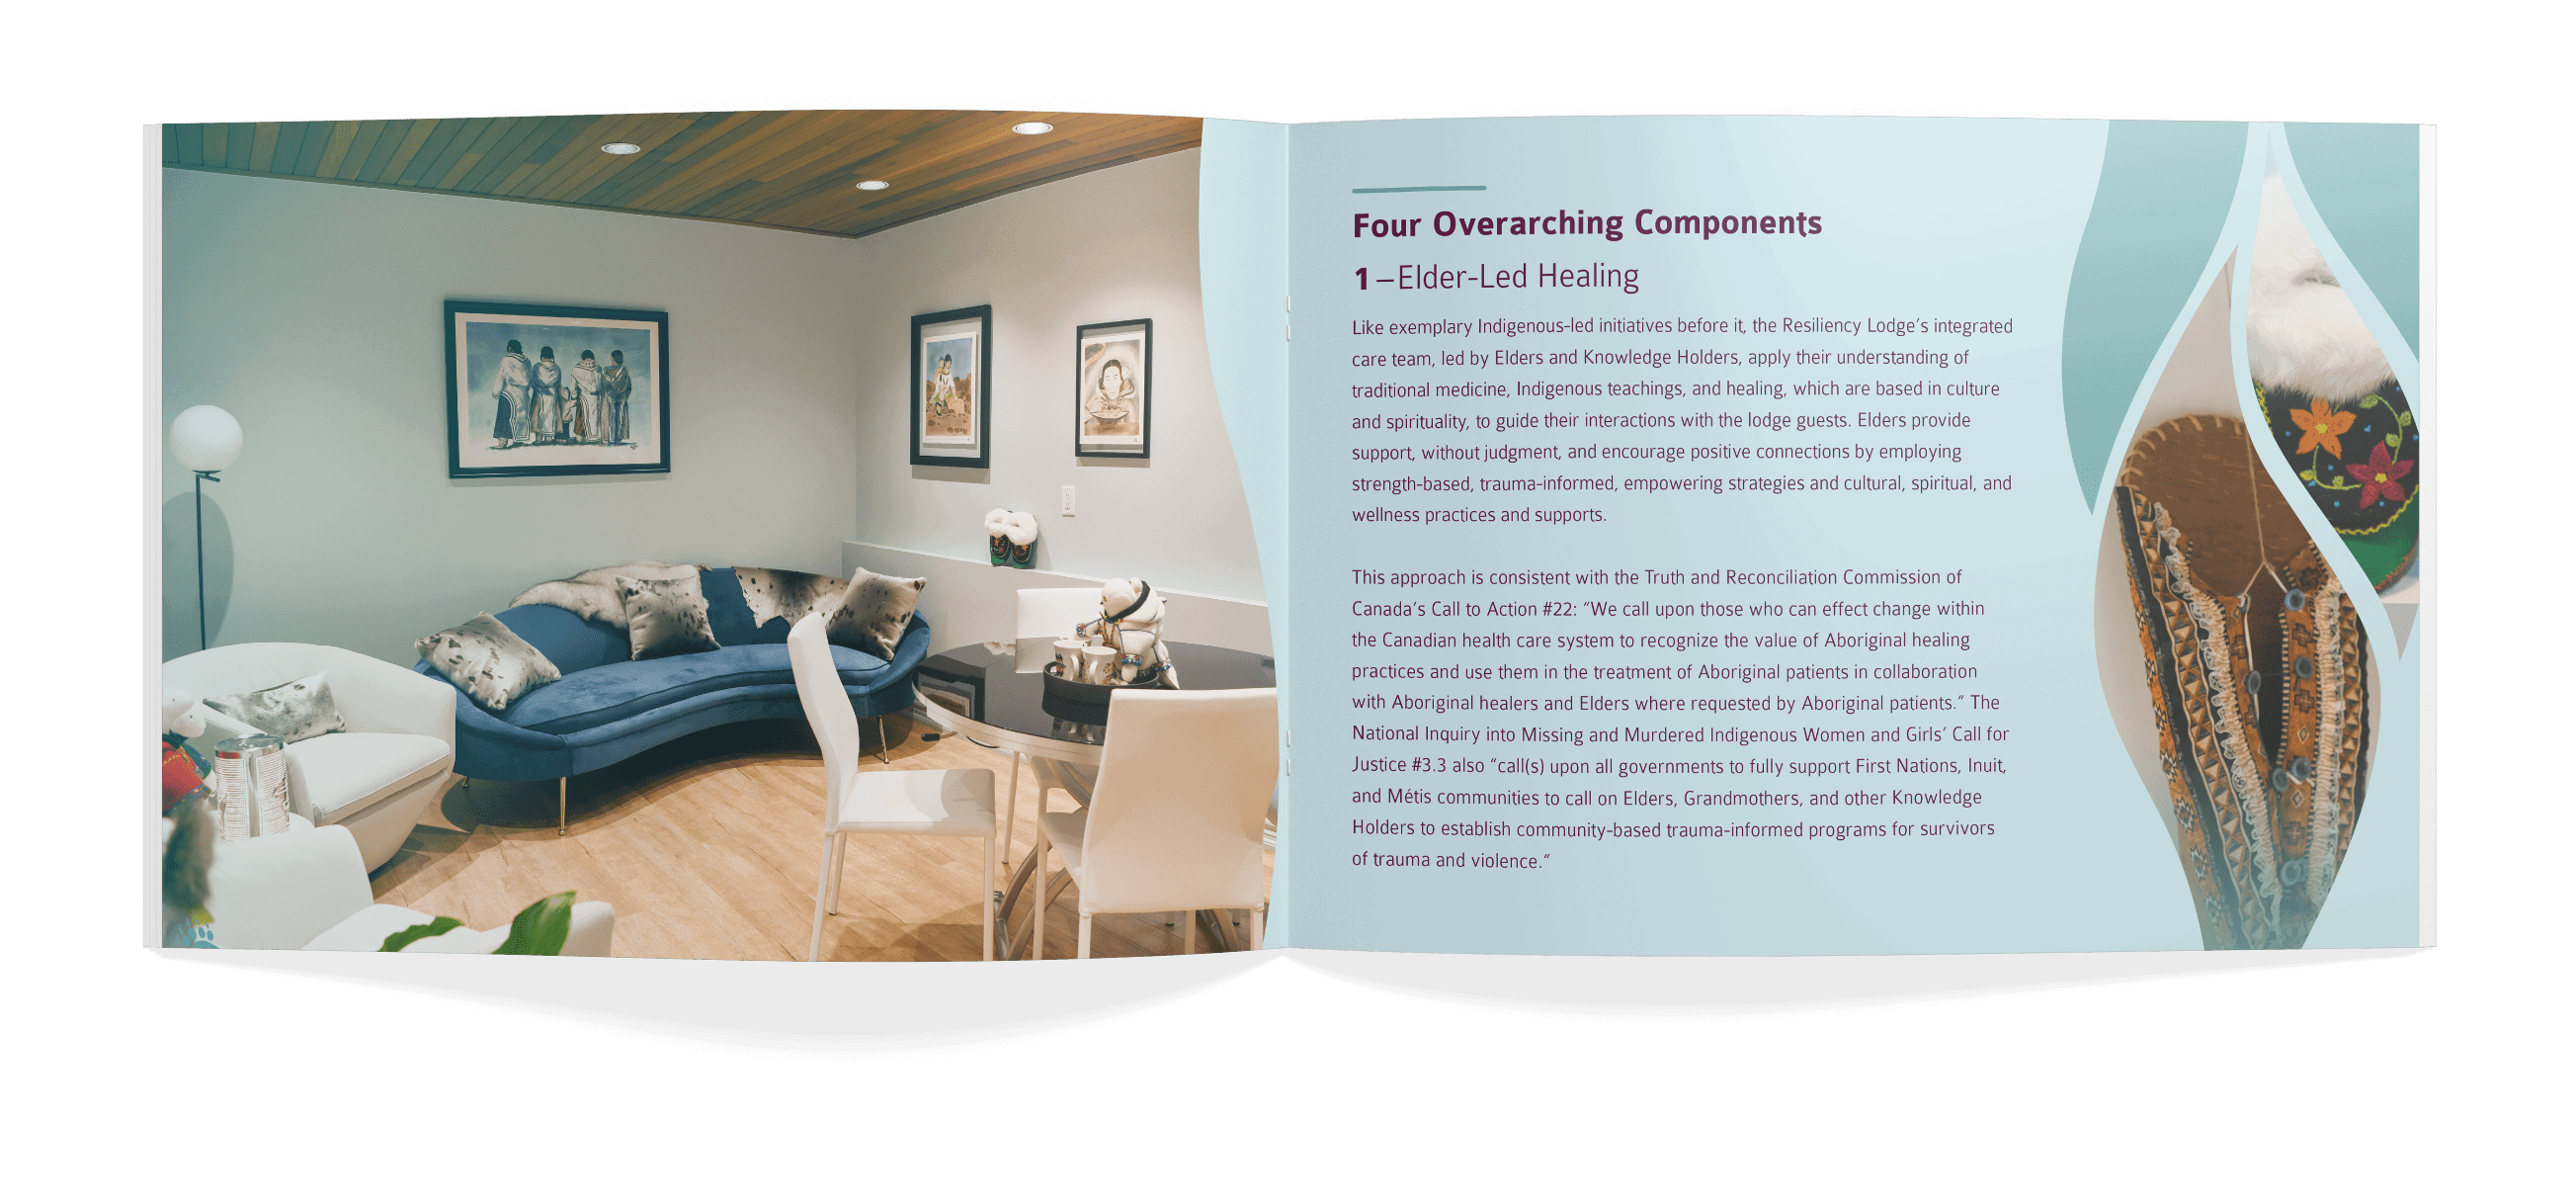 An interior spread of the NWAC Resiliency Lodge booklet. The spread features a photo of the inside of the lodge, with a blue curved couch, a cream coloured loveseat, and a small table with two white chairs around it. The right spread reads "Four Overarching Components - 1 - elder-led healing."